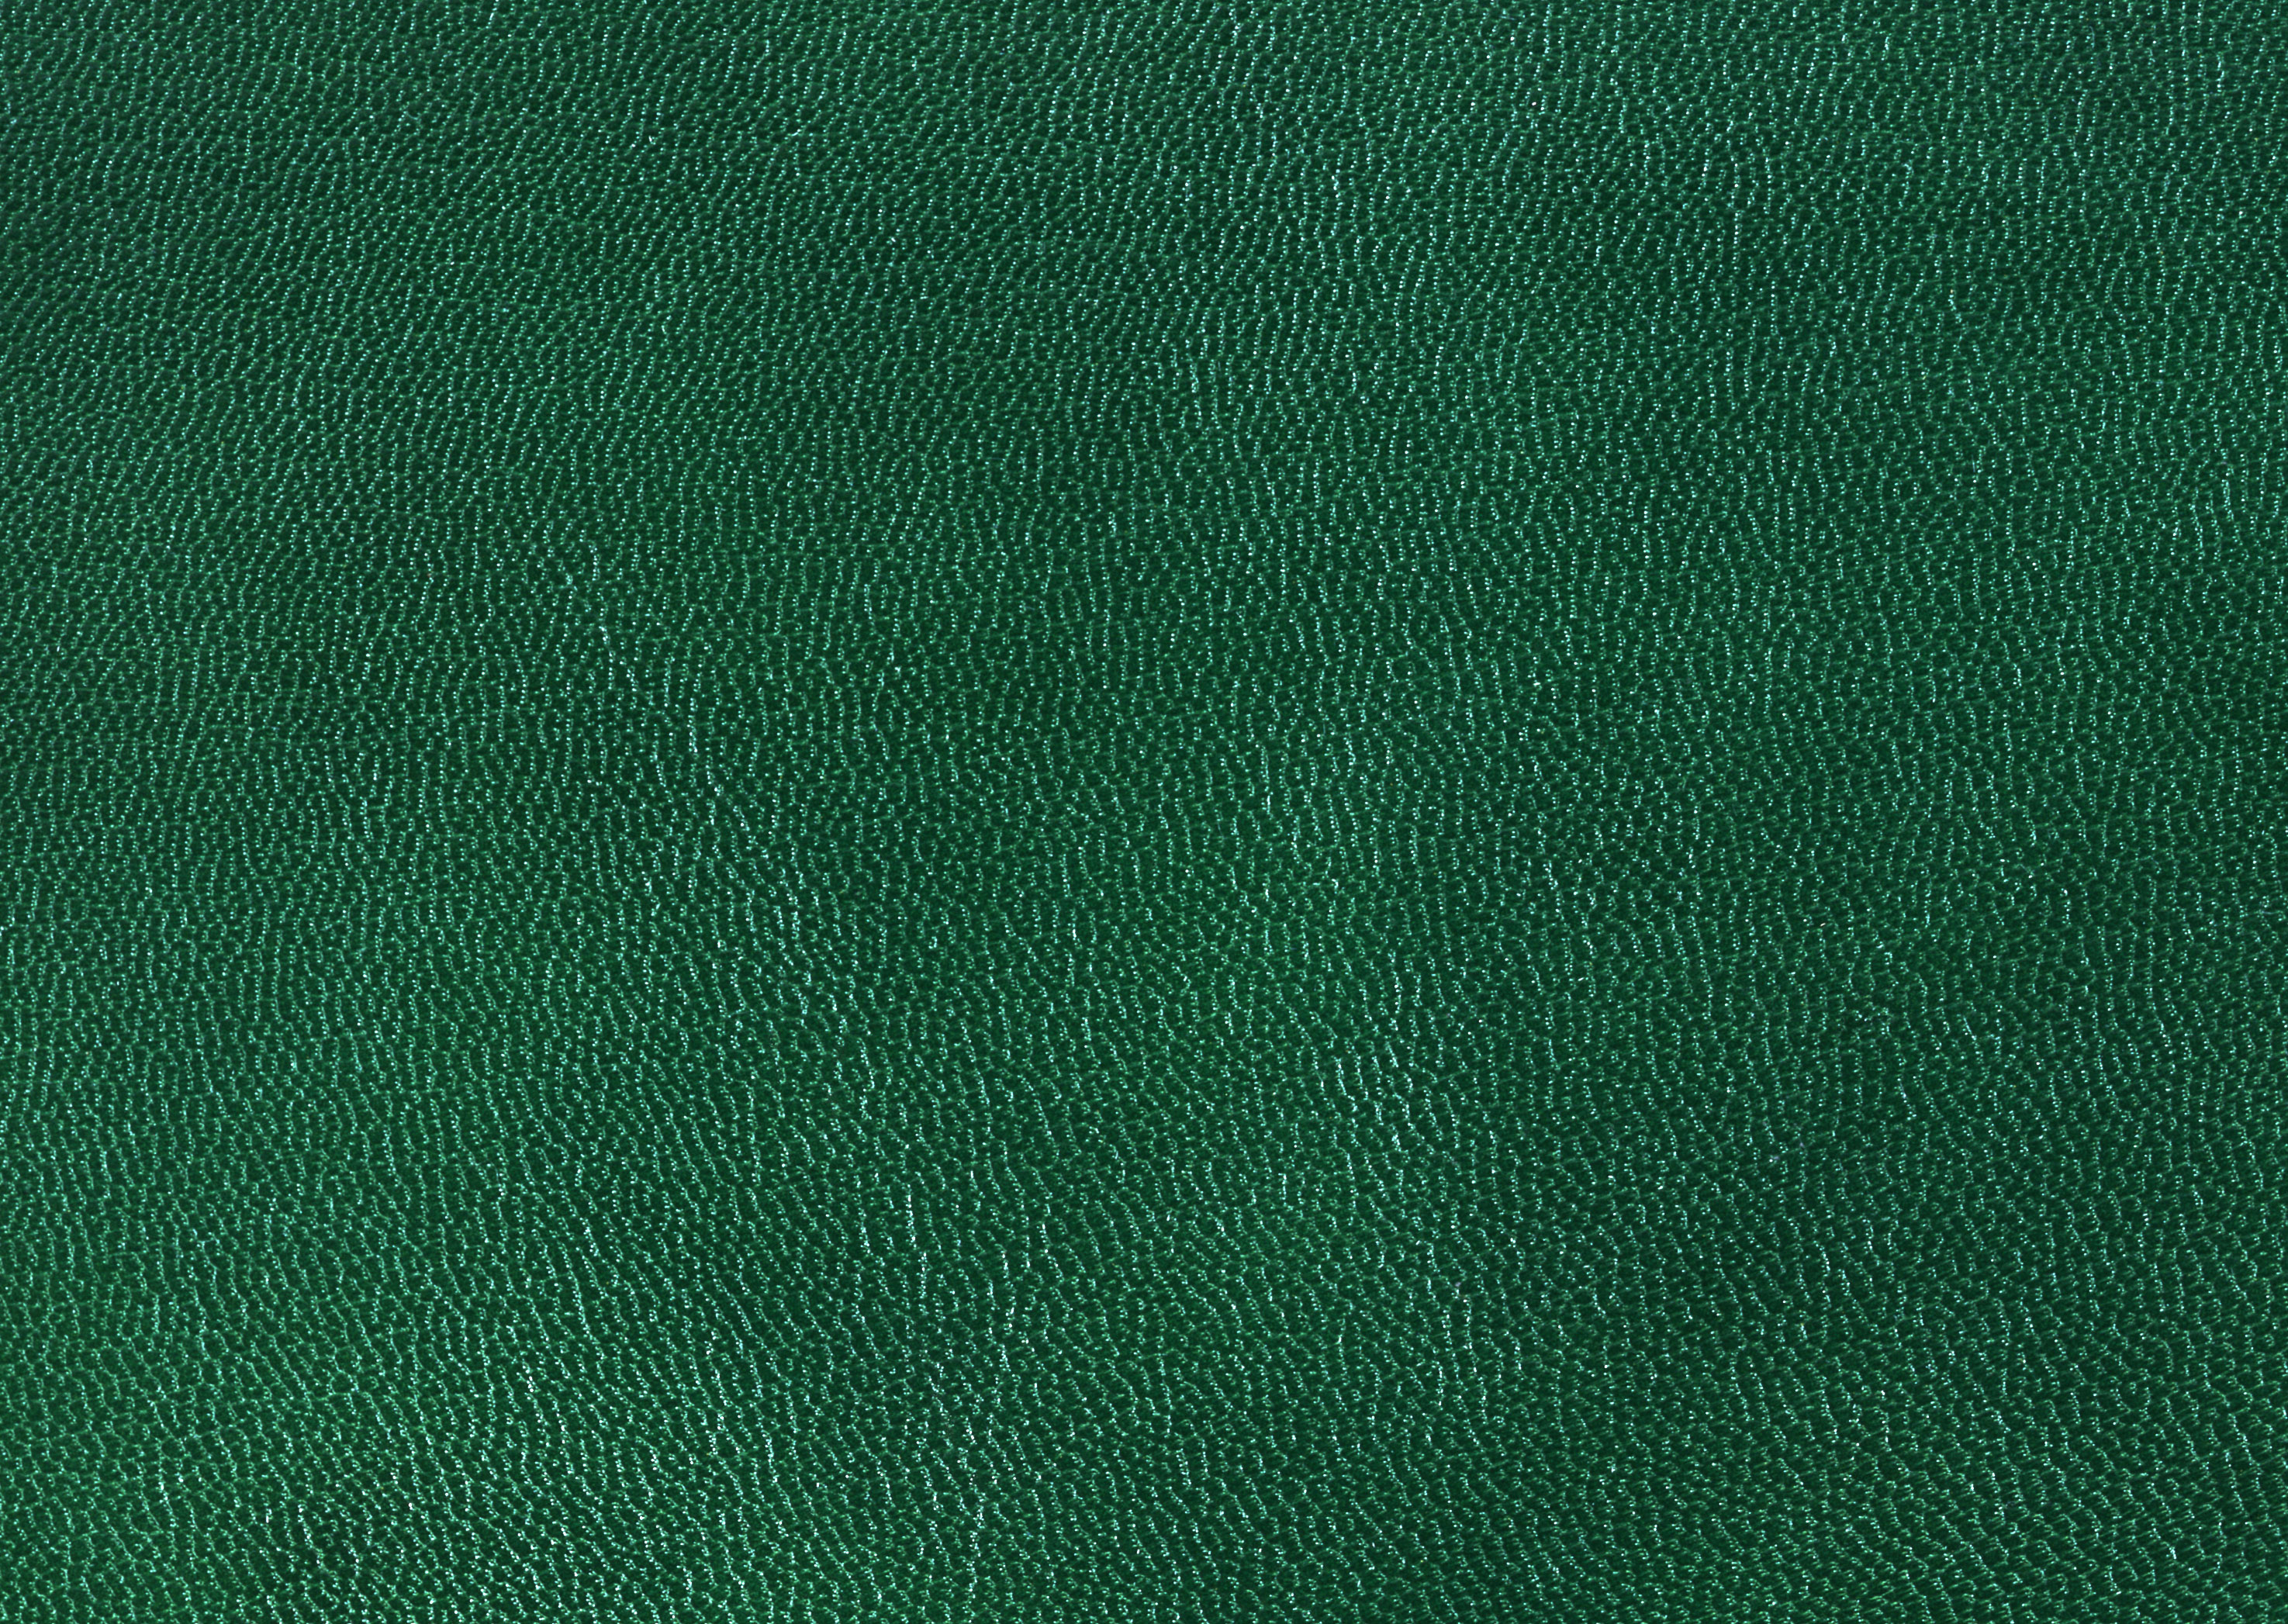 Green leather texture background image free download